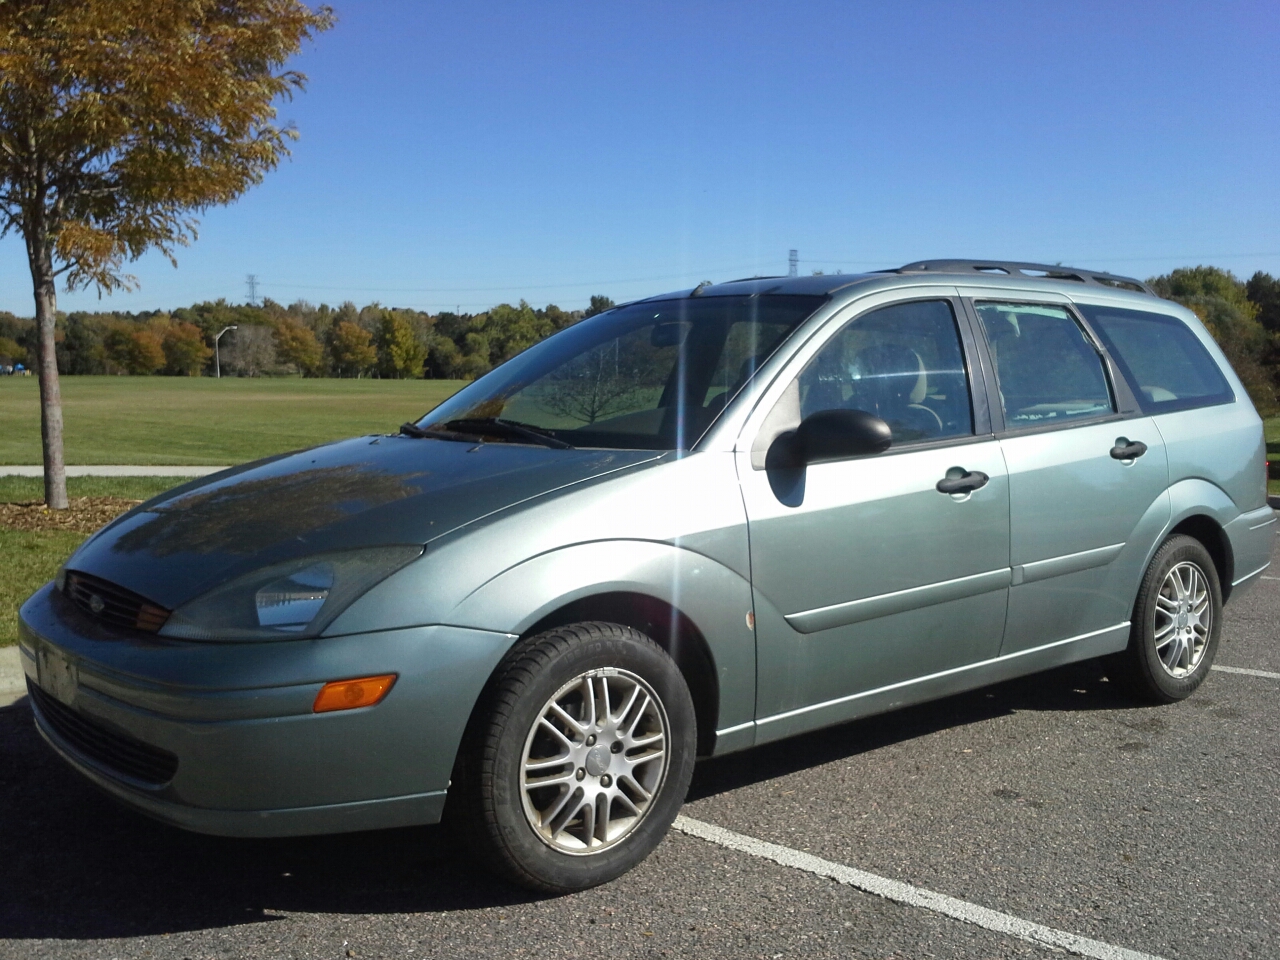 Value of 2003 ford focus wagon #1